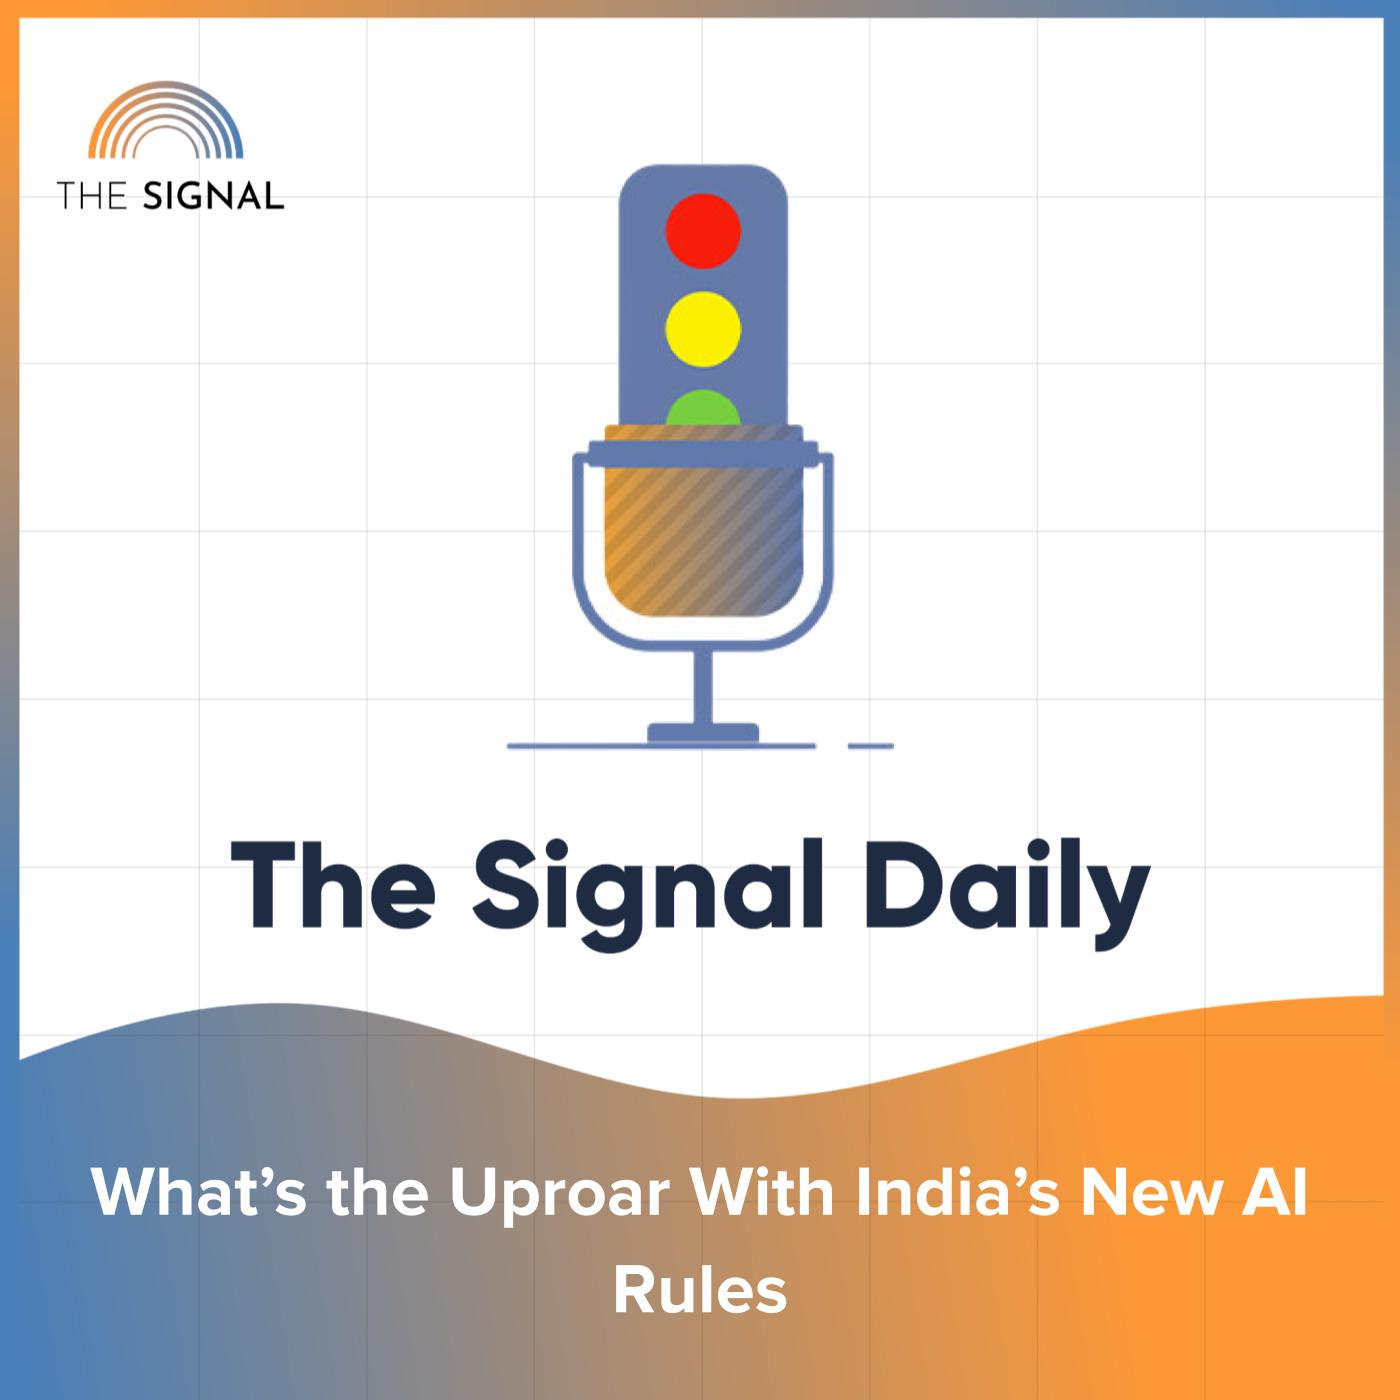 What’s the Uproar With India’s New AI Rules